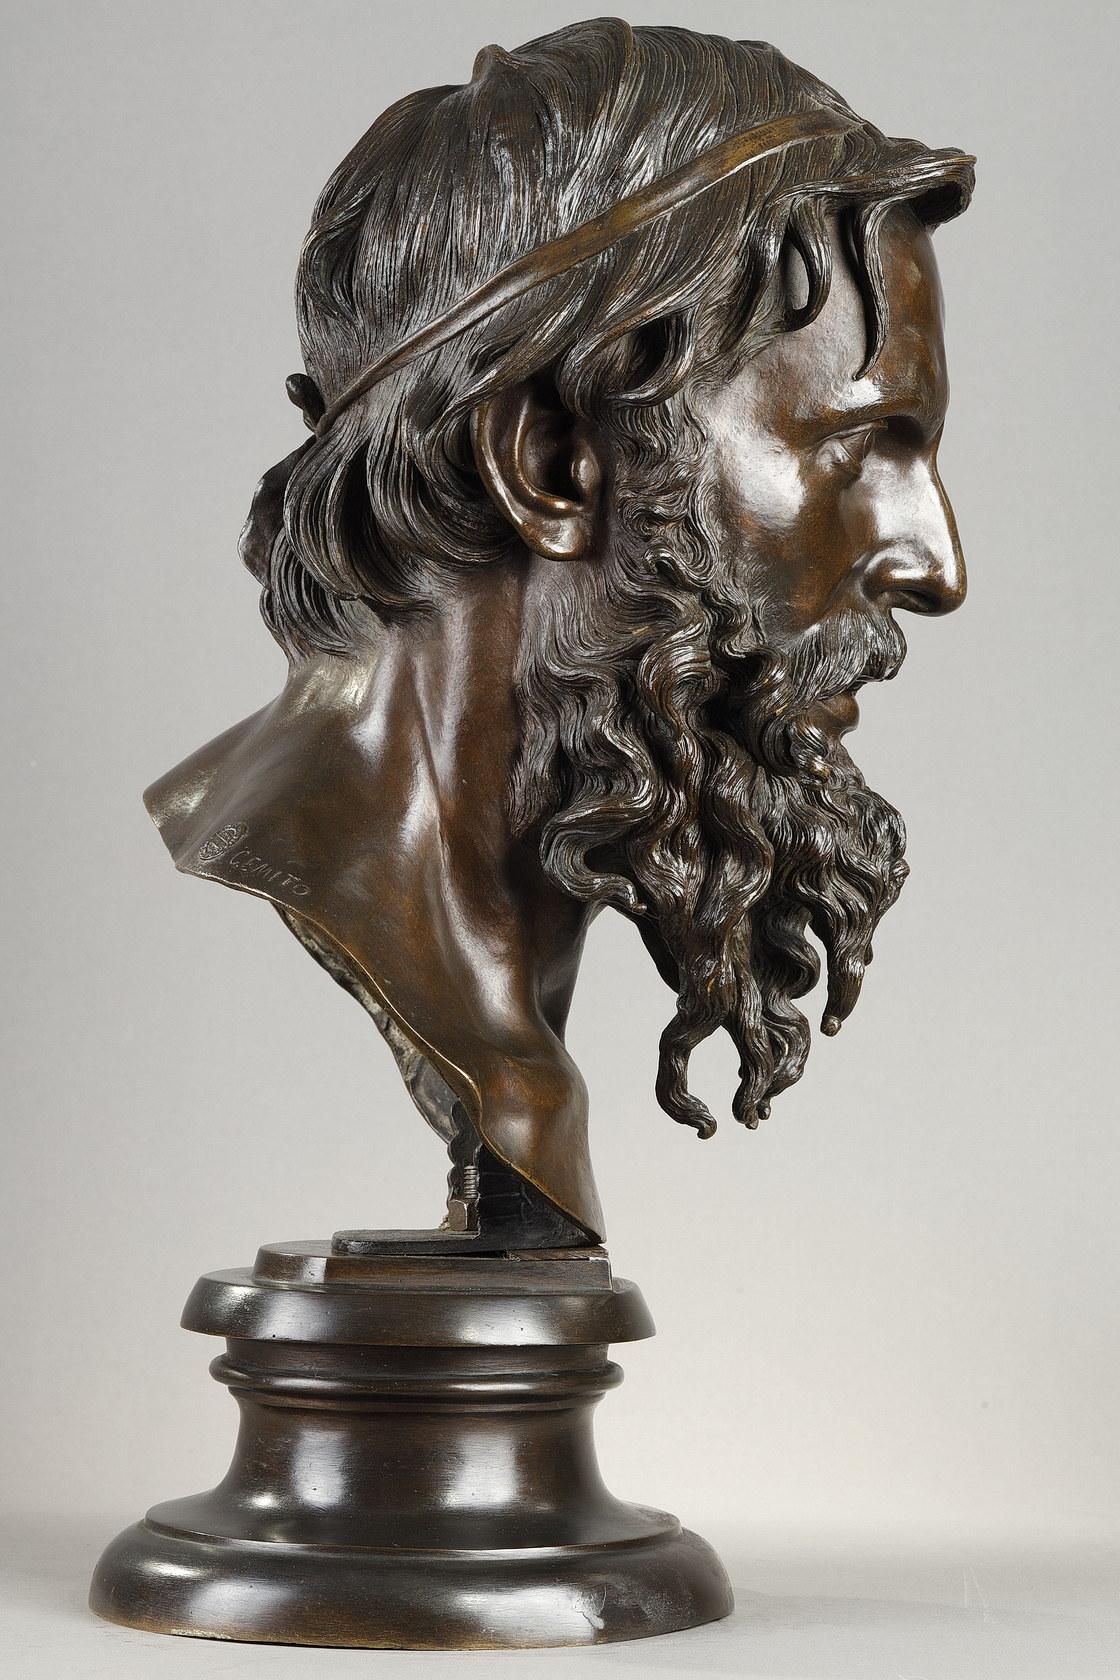 The Philosopher
by Vincenzo Gemito (1852-1929)

Bust in bronze with a nuanced dark brown patina
Signed 